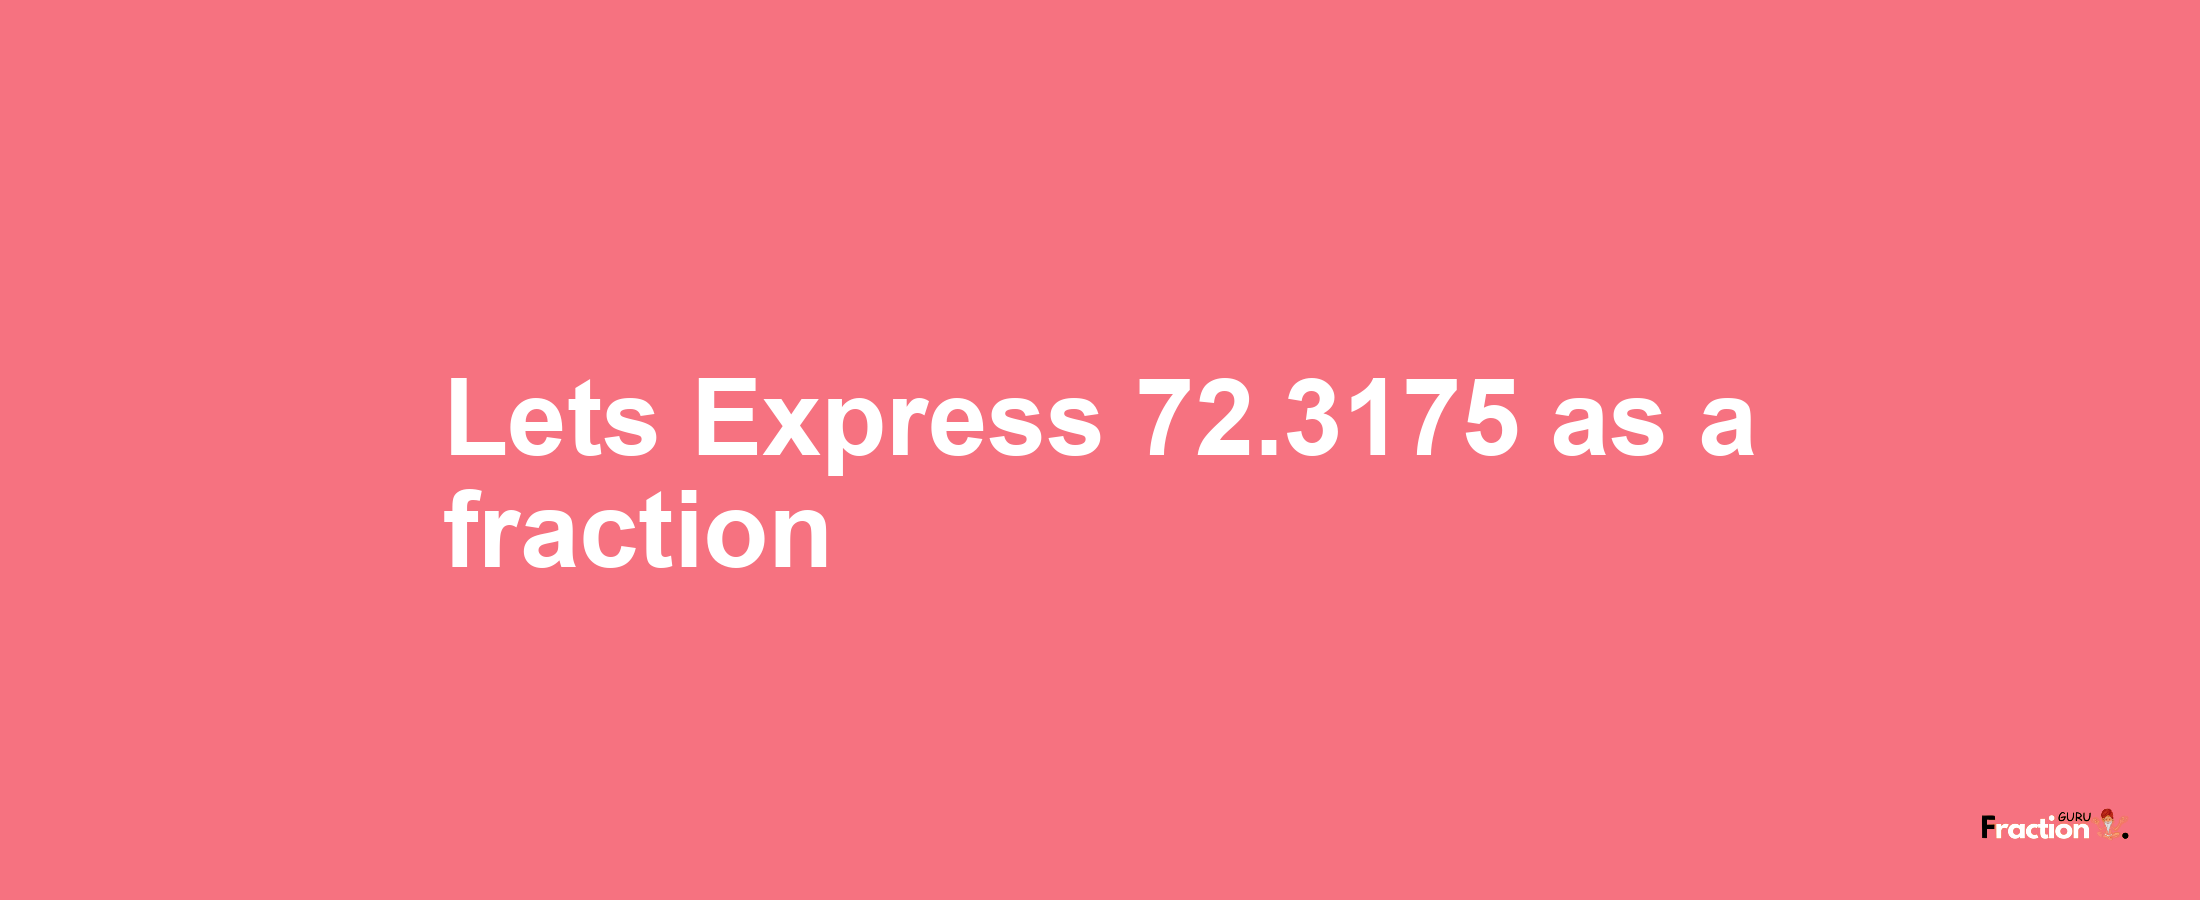 Lets Express 72.3175 as afraction